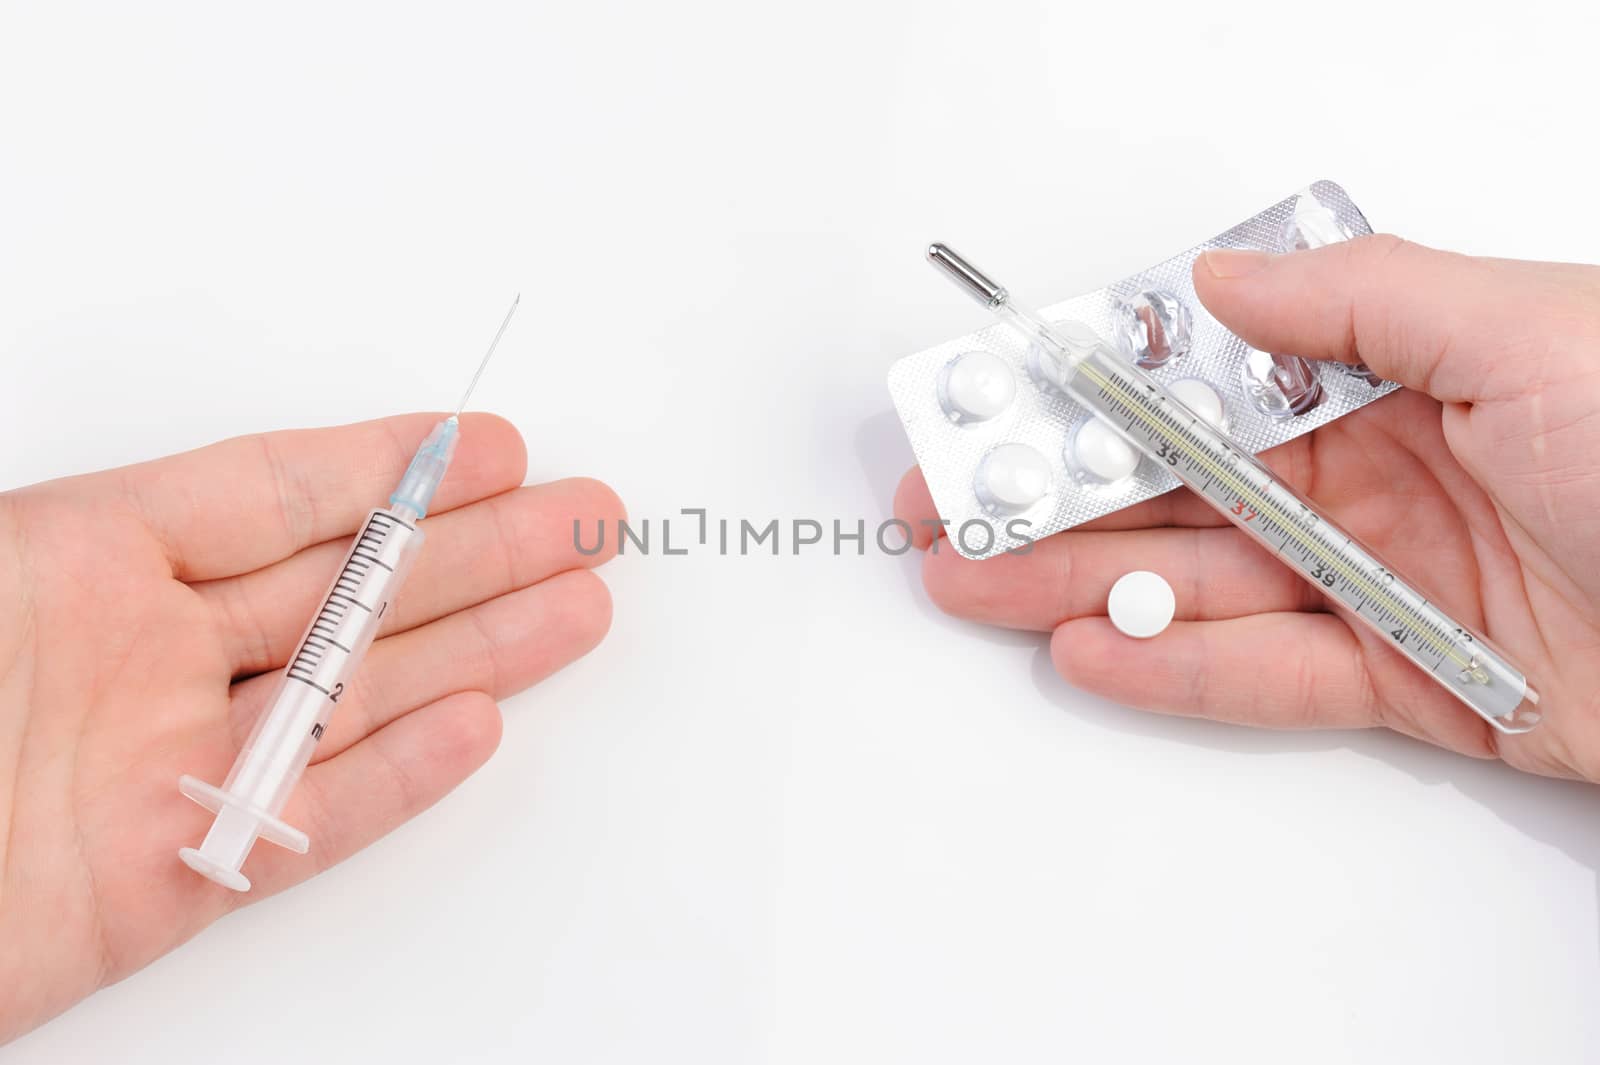  thermometer, syringe, and pills on hands on white